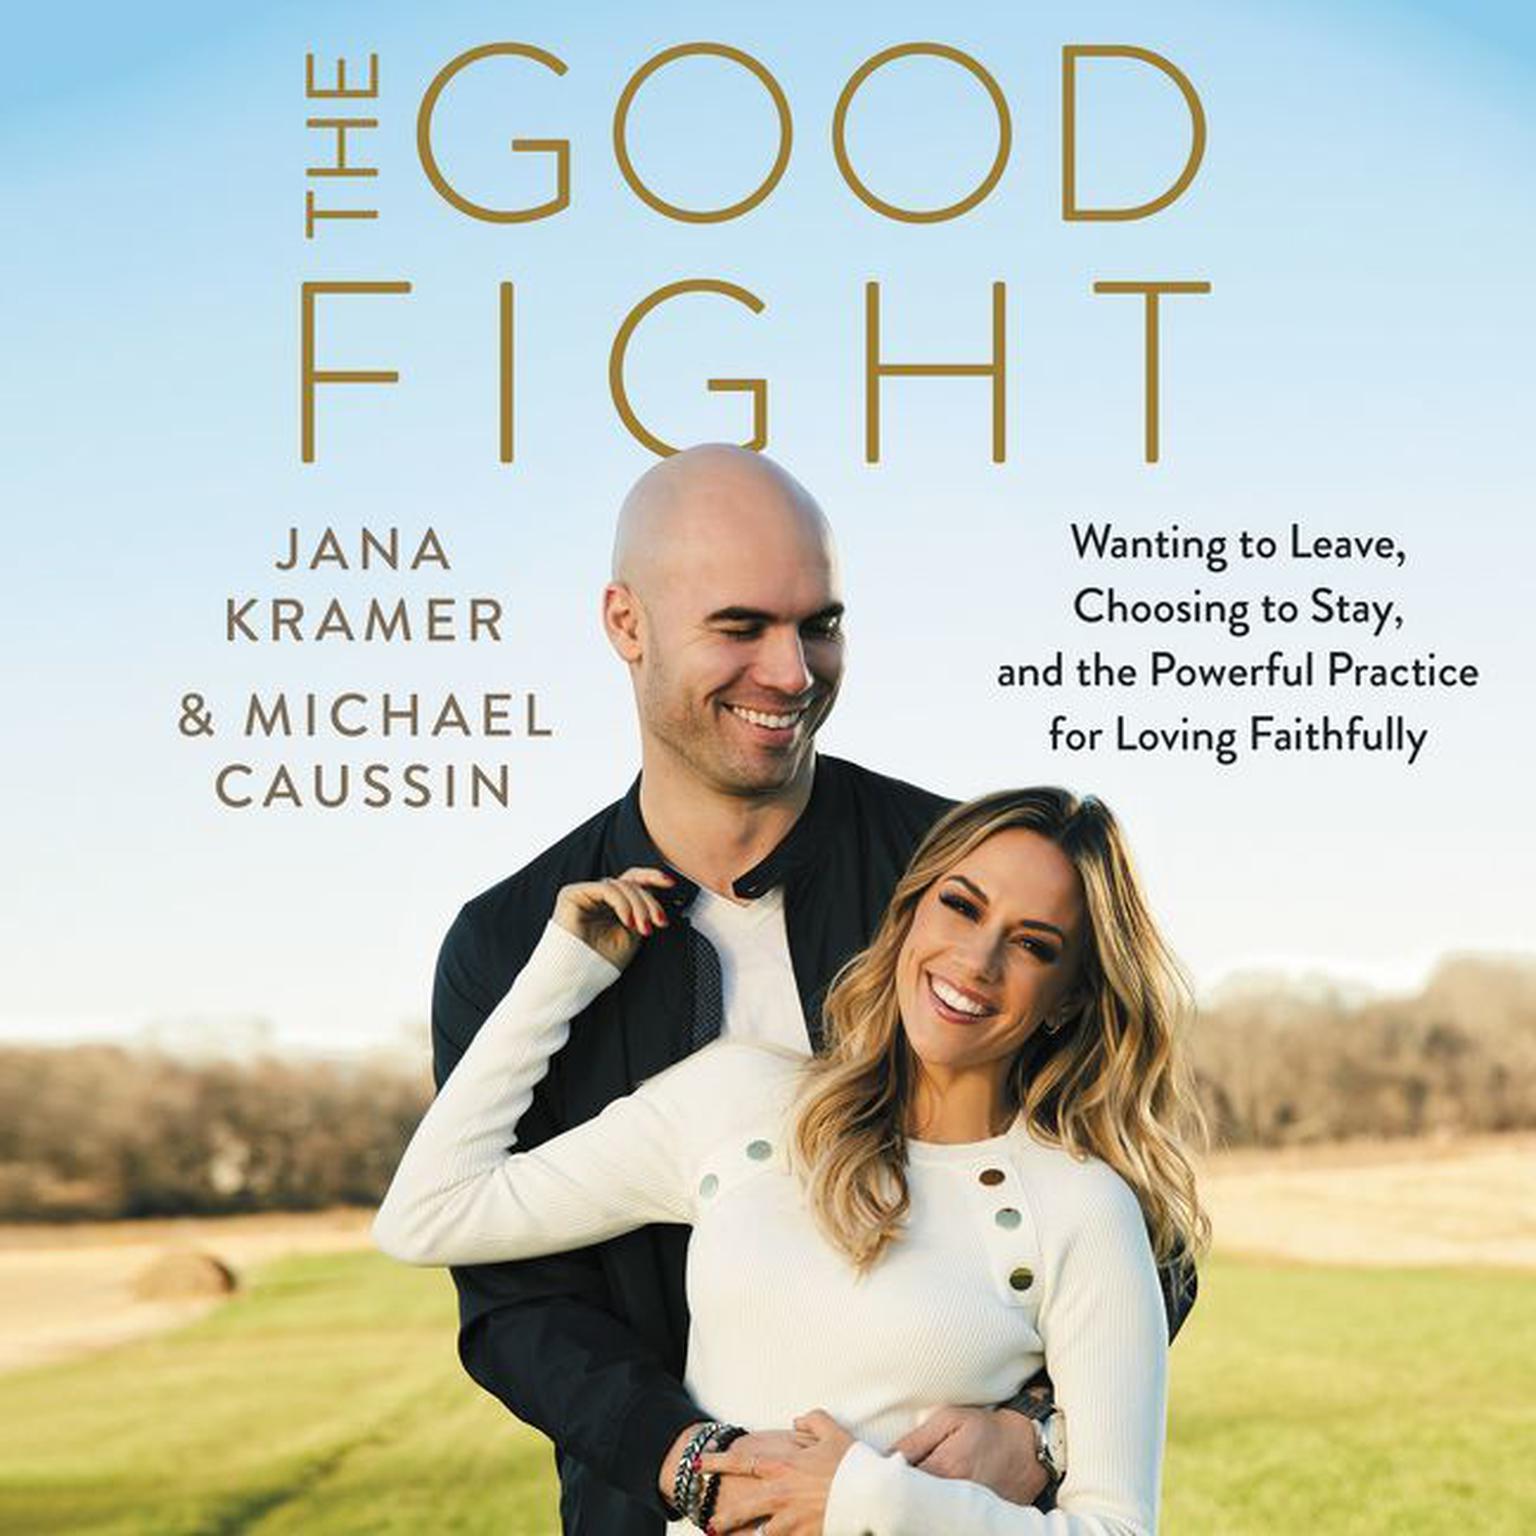 The Good Fight: Wanting to Leave, Choosing to Stay, and the Powerful Practice for Loving Faithfully Audiobook, by Jana Kramer